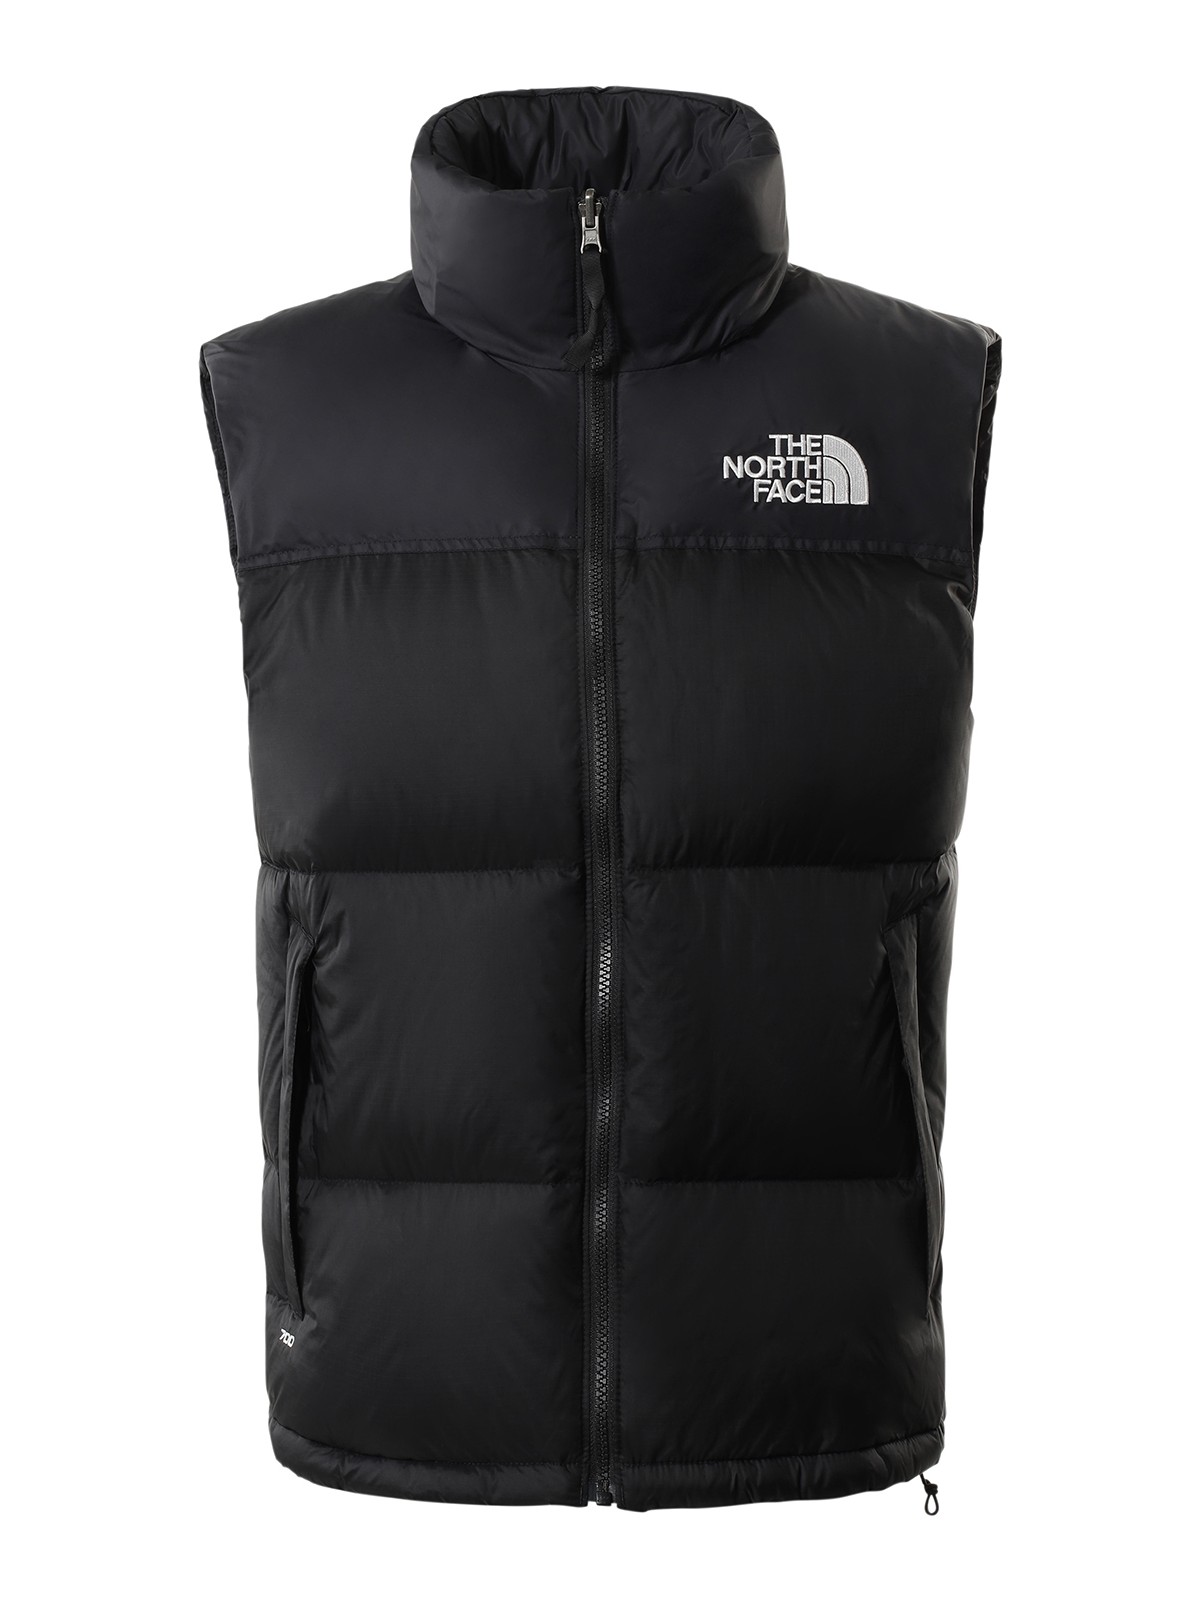 The North Face Vest In Black